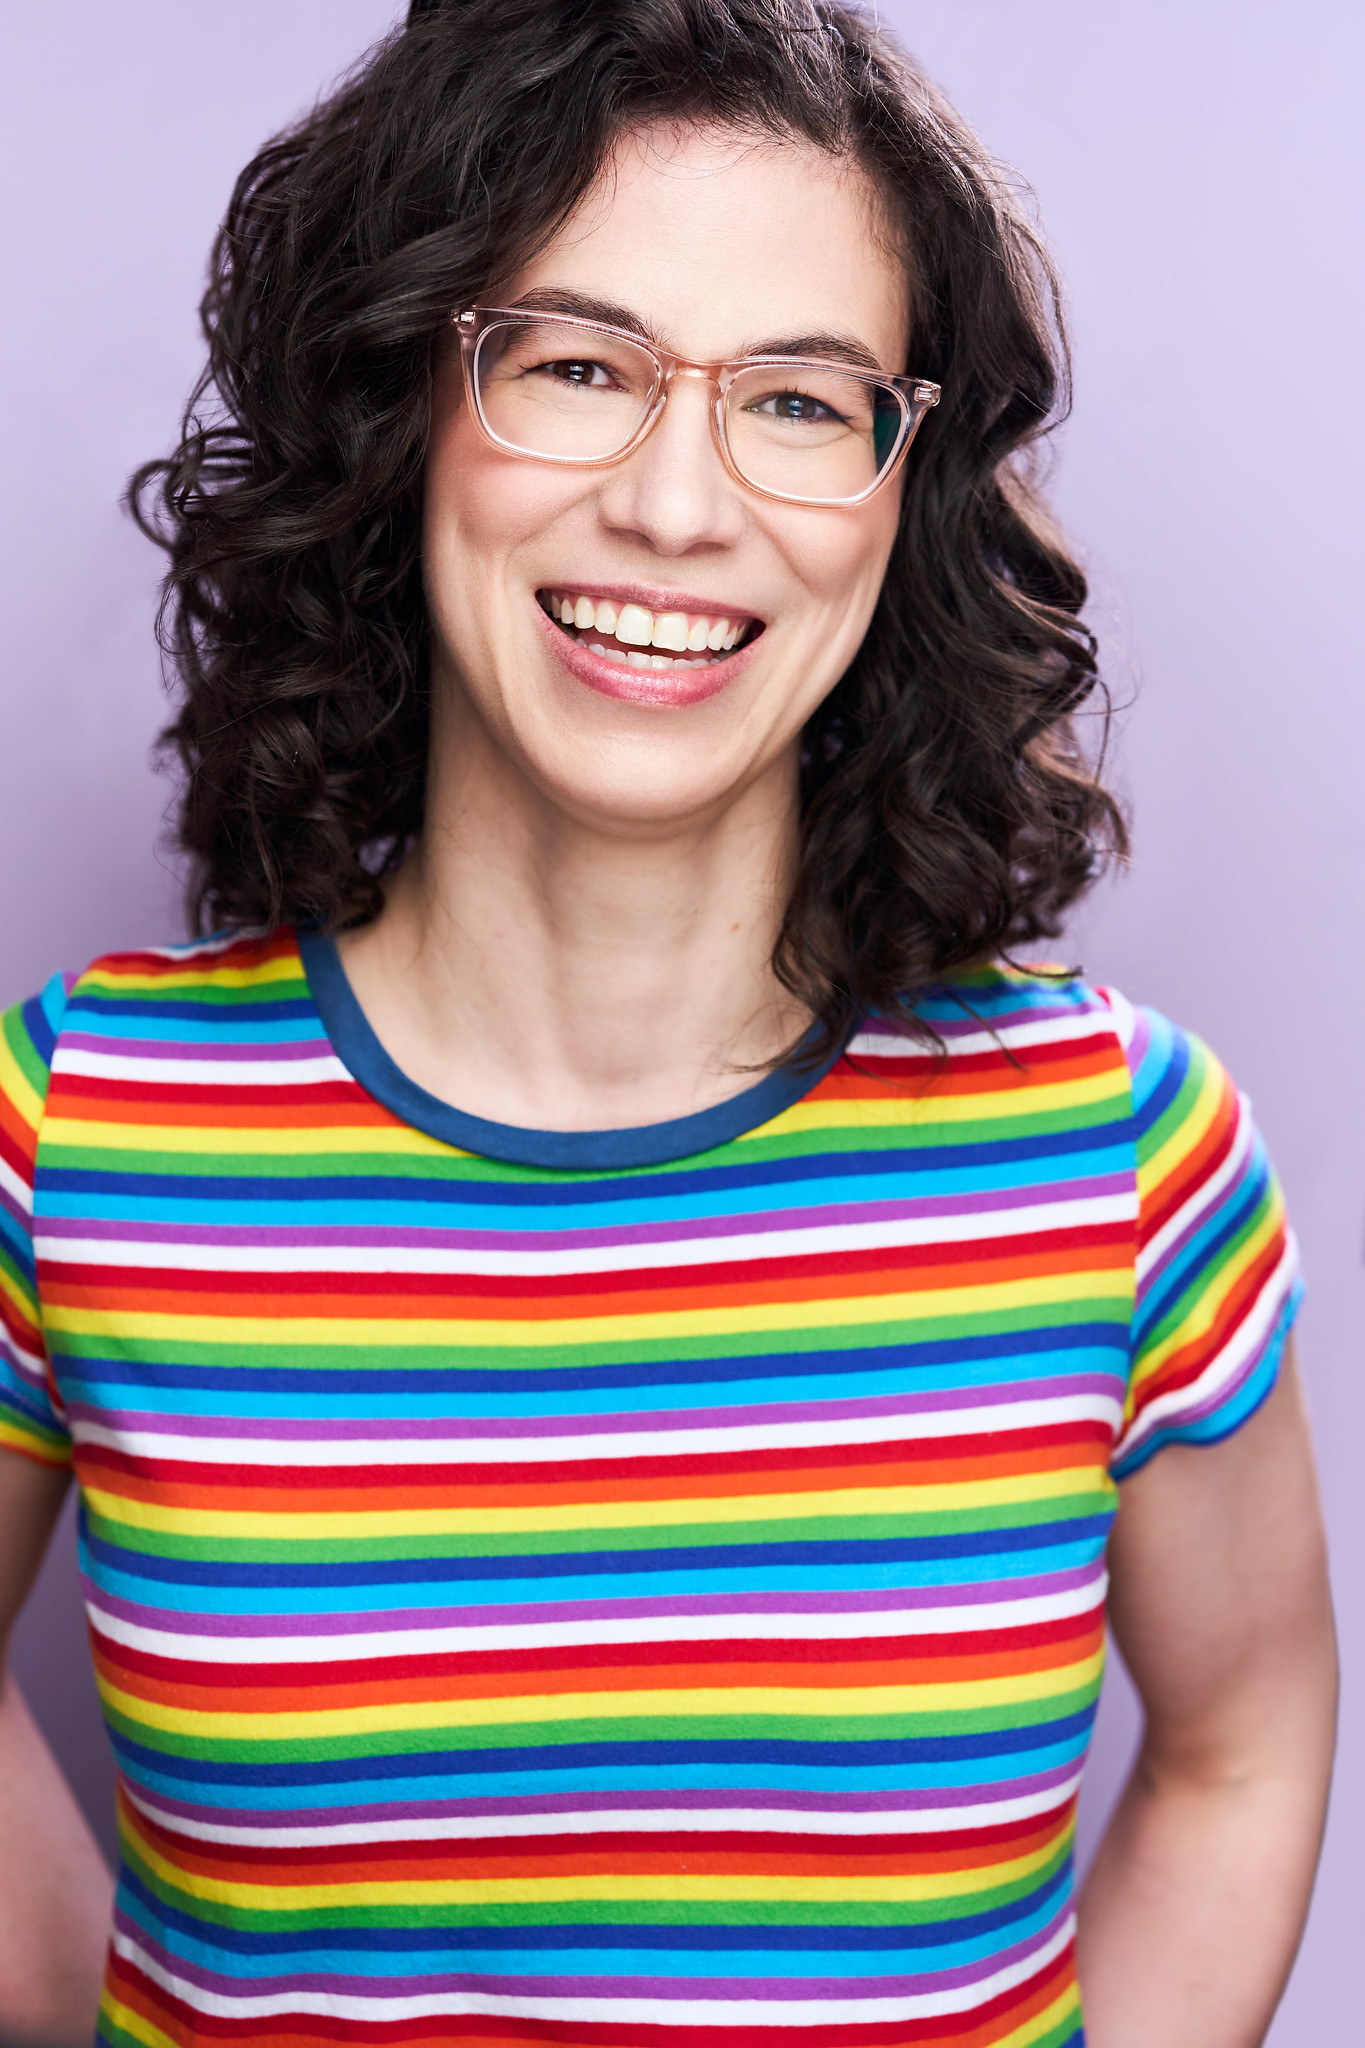 A female-presenting person with pale skin, clear plastic glasses, and shoulder-length curly brown hair, wears a rainbow striped T-shirt. They are smiling and standing against a light purple background